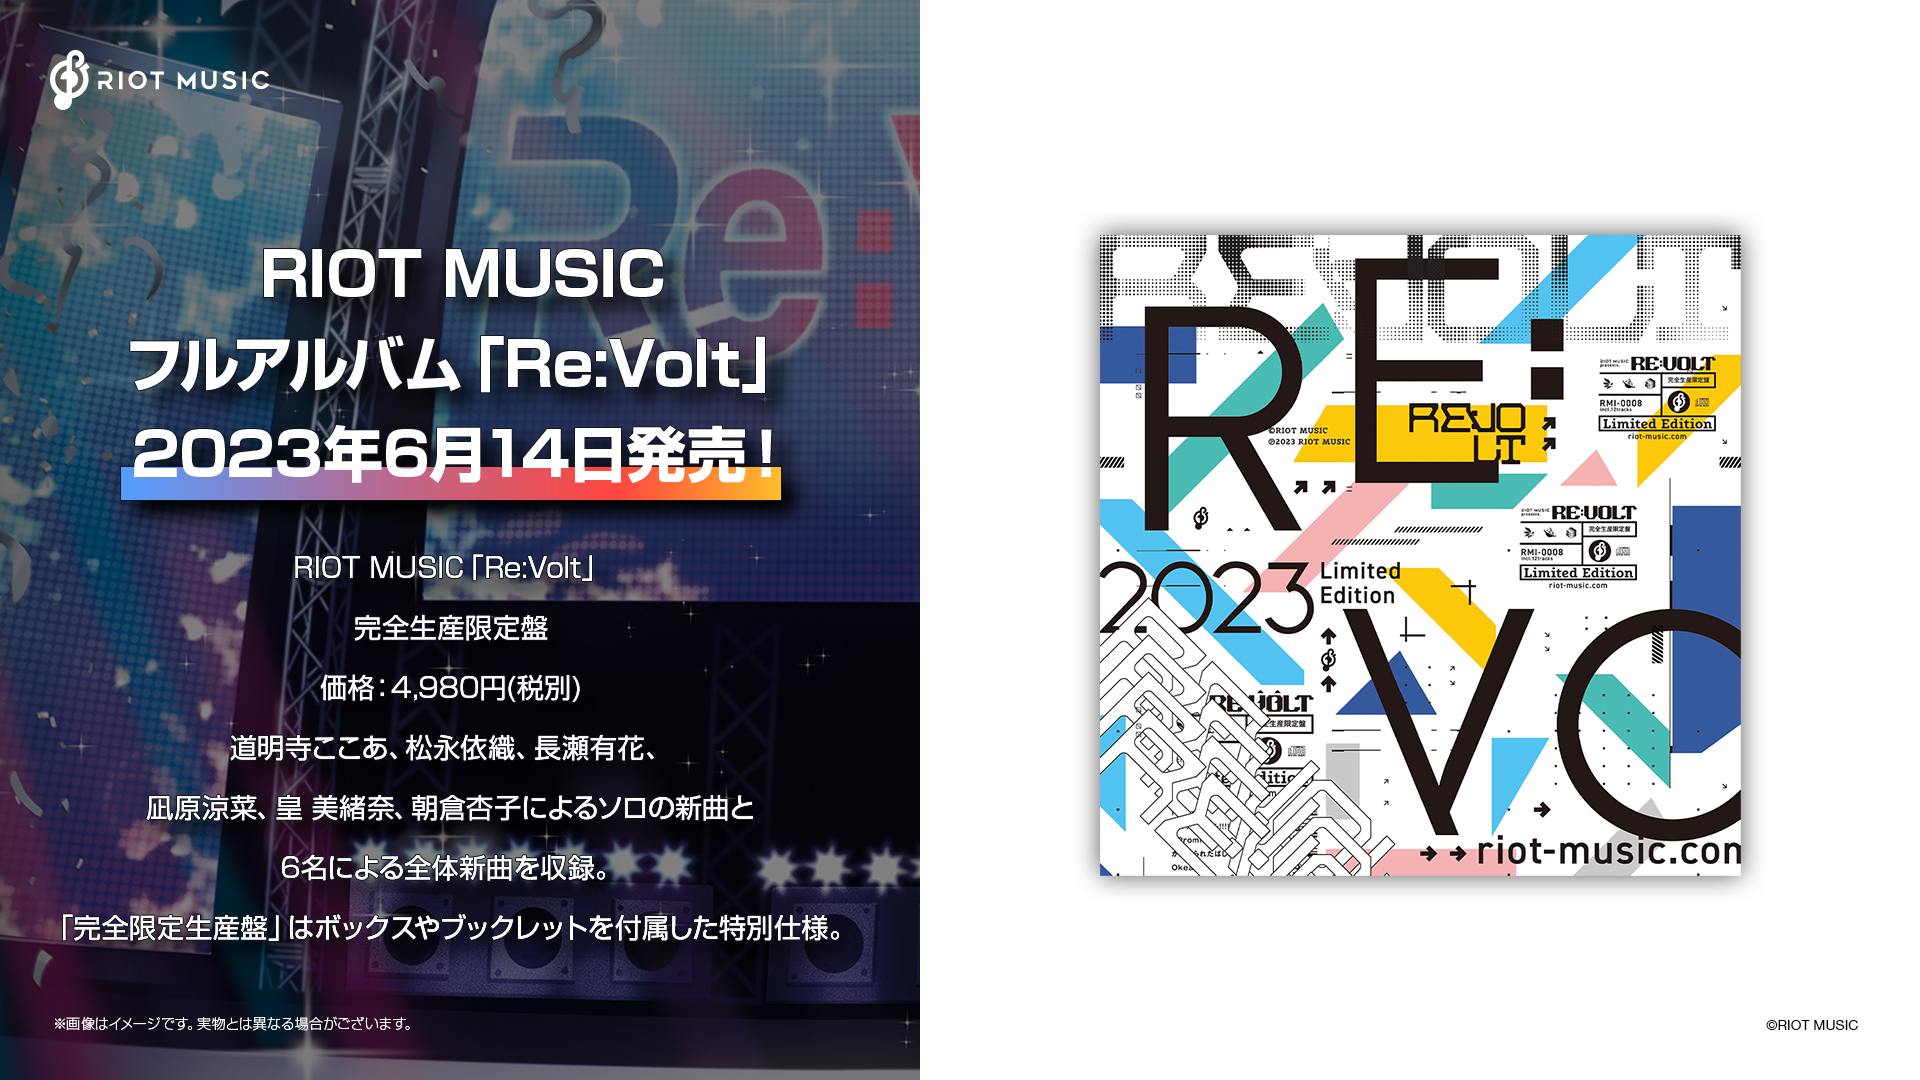 RIOT MUSIC Releases Electrifying New Group Album “Re:Volt” On June 